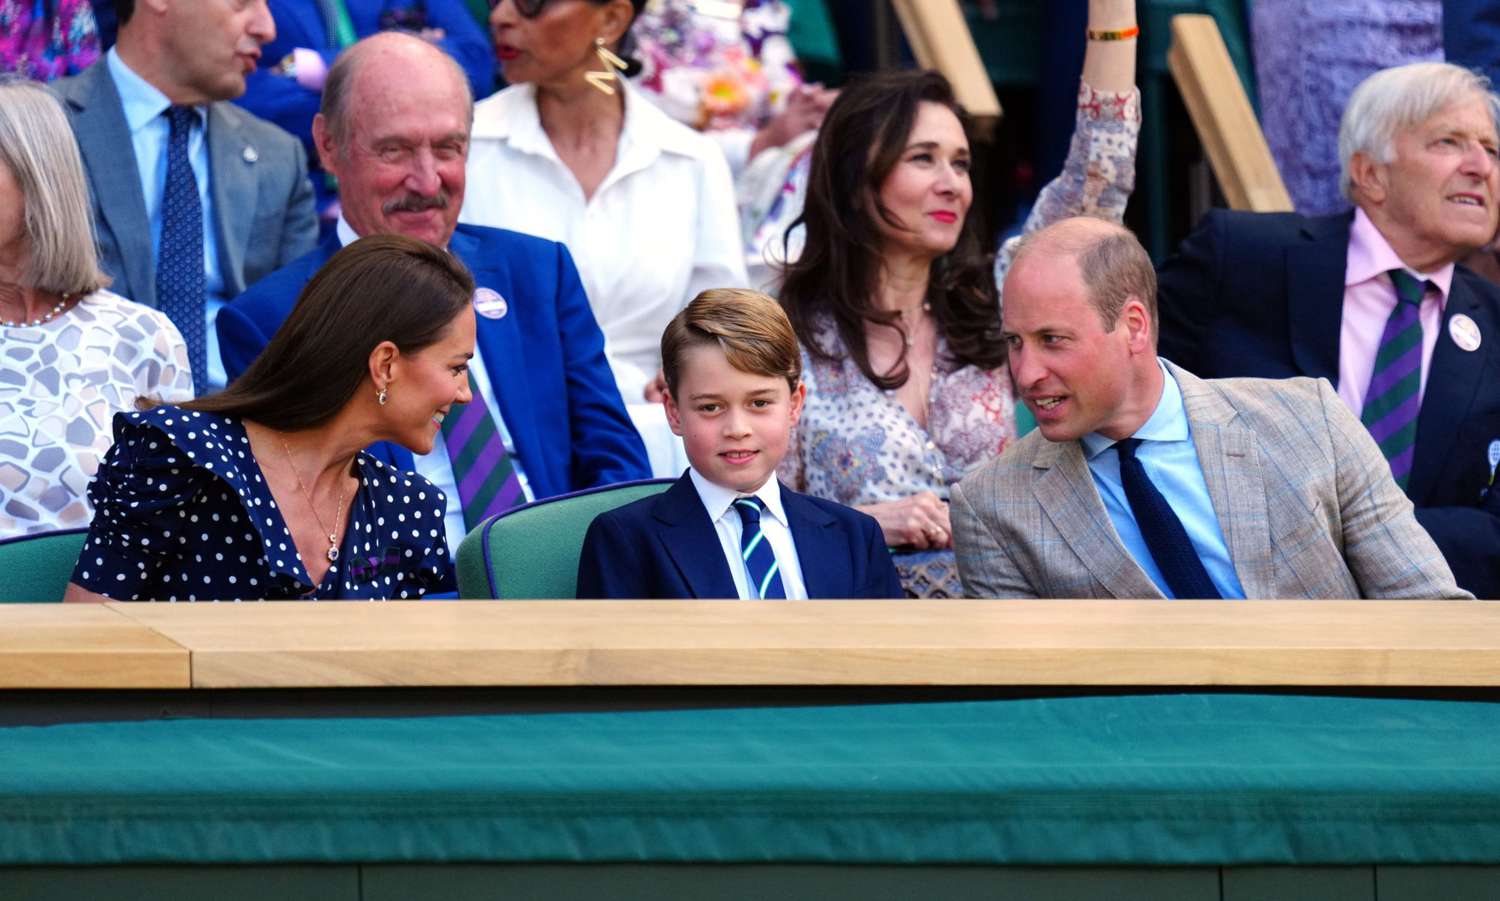 Mandatory Credit: Photo by Javier Garcia/Shutterstock (13018062u) Prince William, Catherine Duchess of Cambridge and Prince George in the Royal Box on Centre Court Wimbledon Tennis Championships, Day 14, The All England Lawn Tennis and Croquet Club, London, UK - 10 Jul 2022